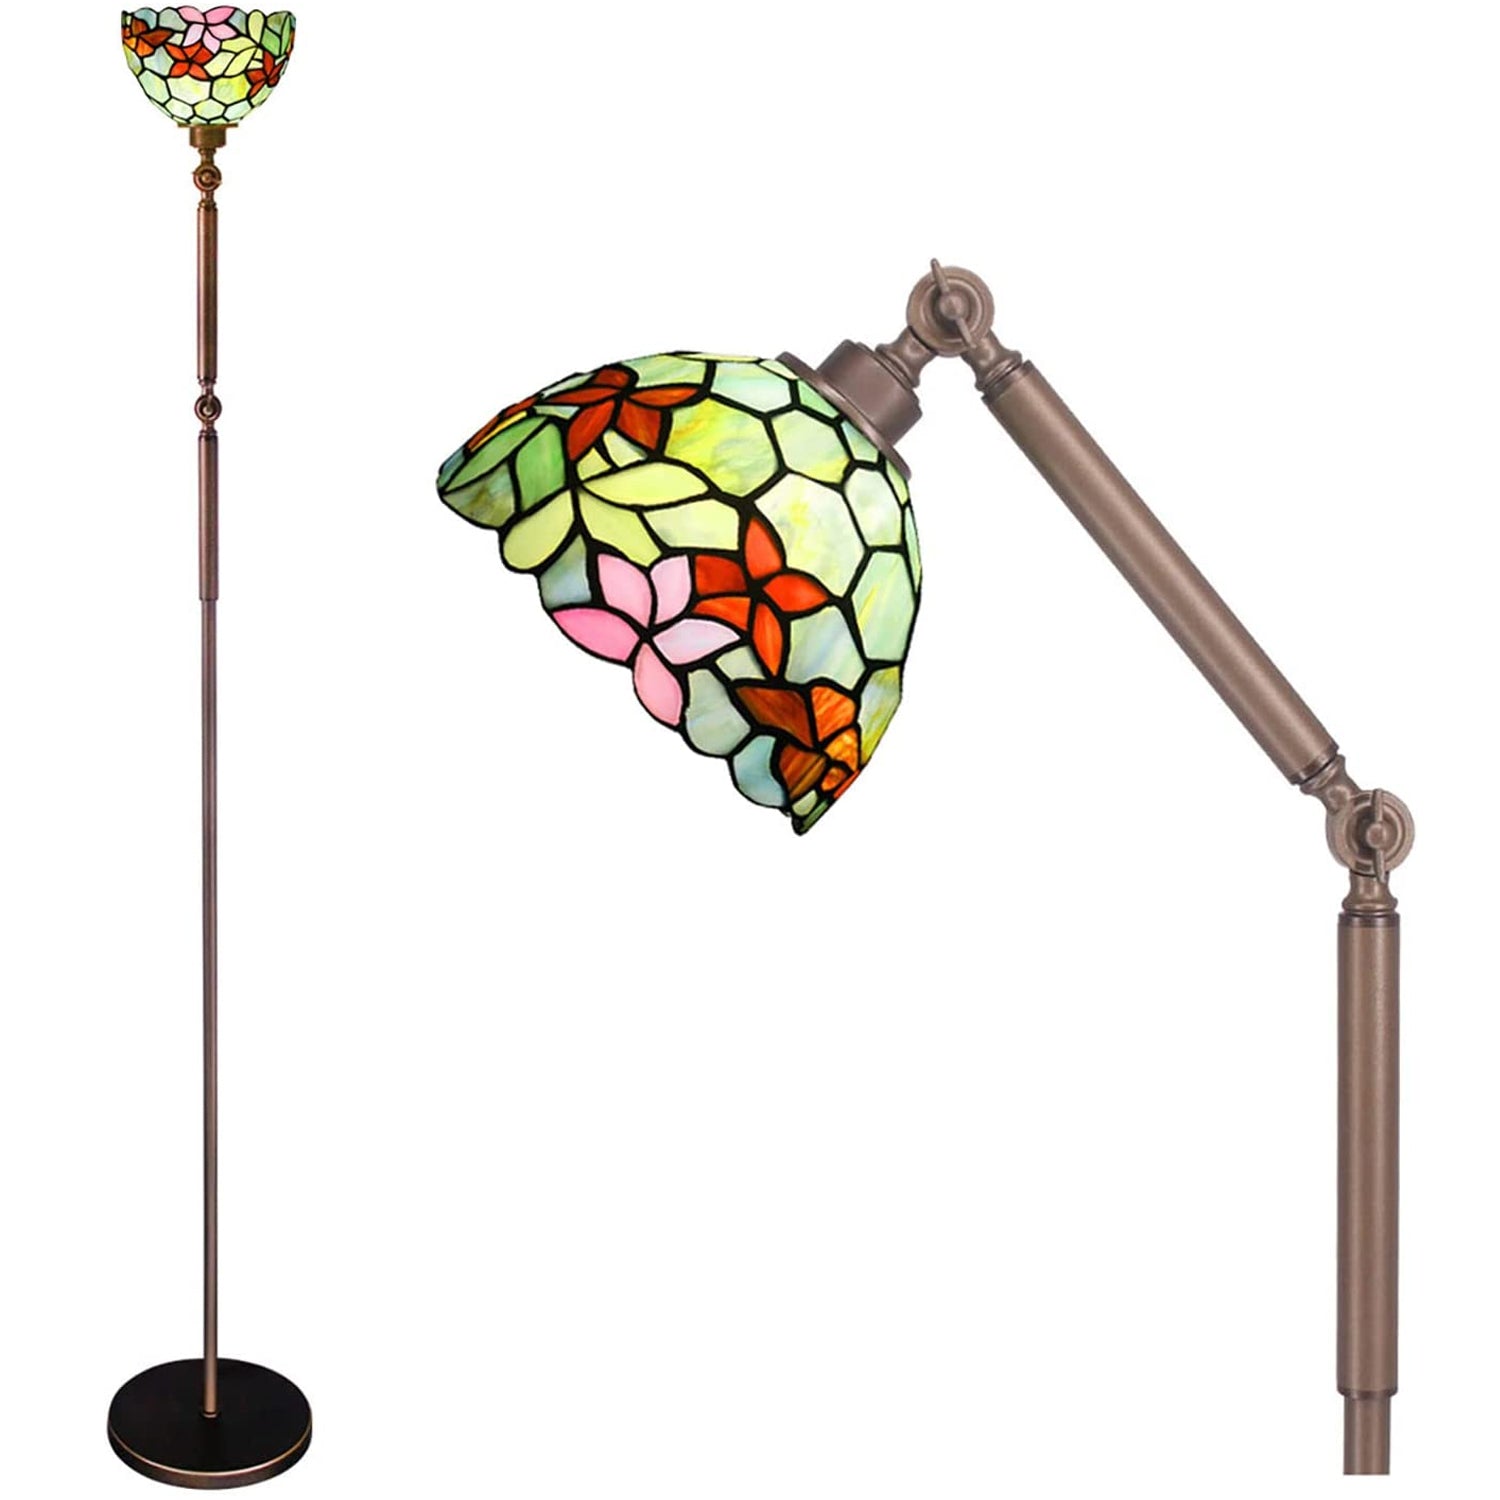 Werfactory® Torchiere Tiffany Floor Standing Stained Glass Flower Arched Lamp Swing Arm Angle Adjustable Reading Light